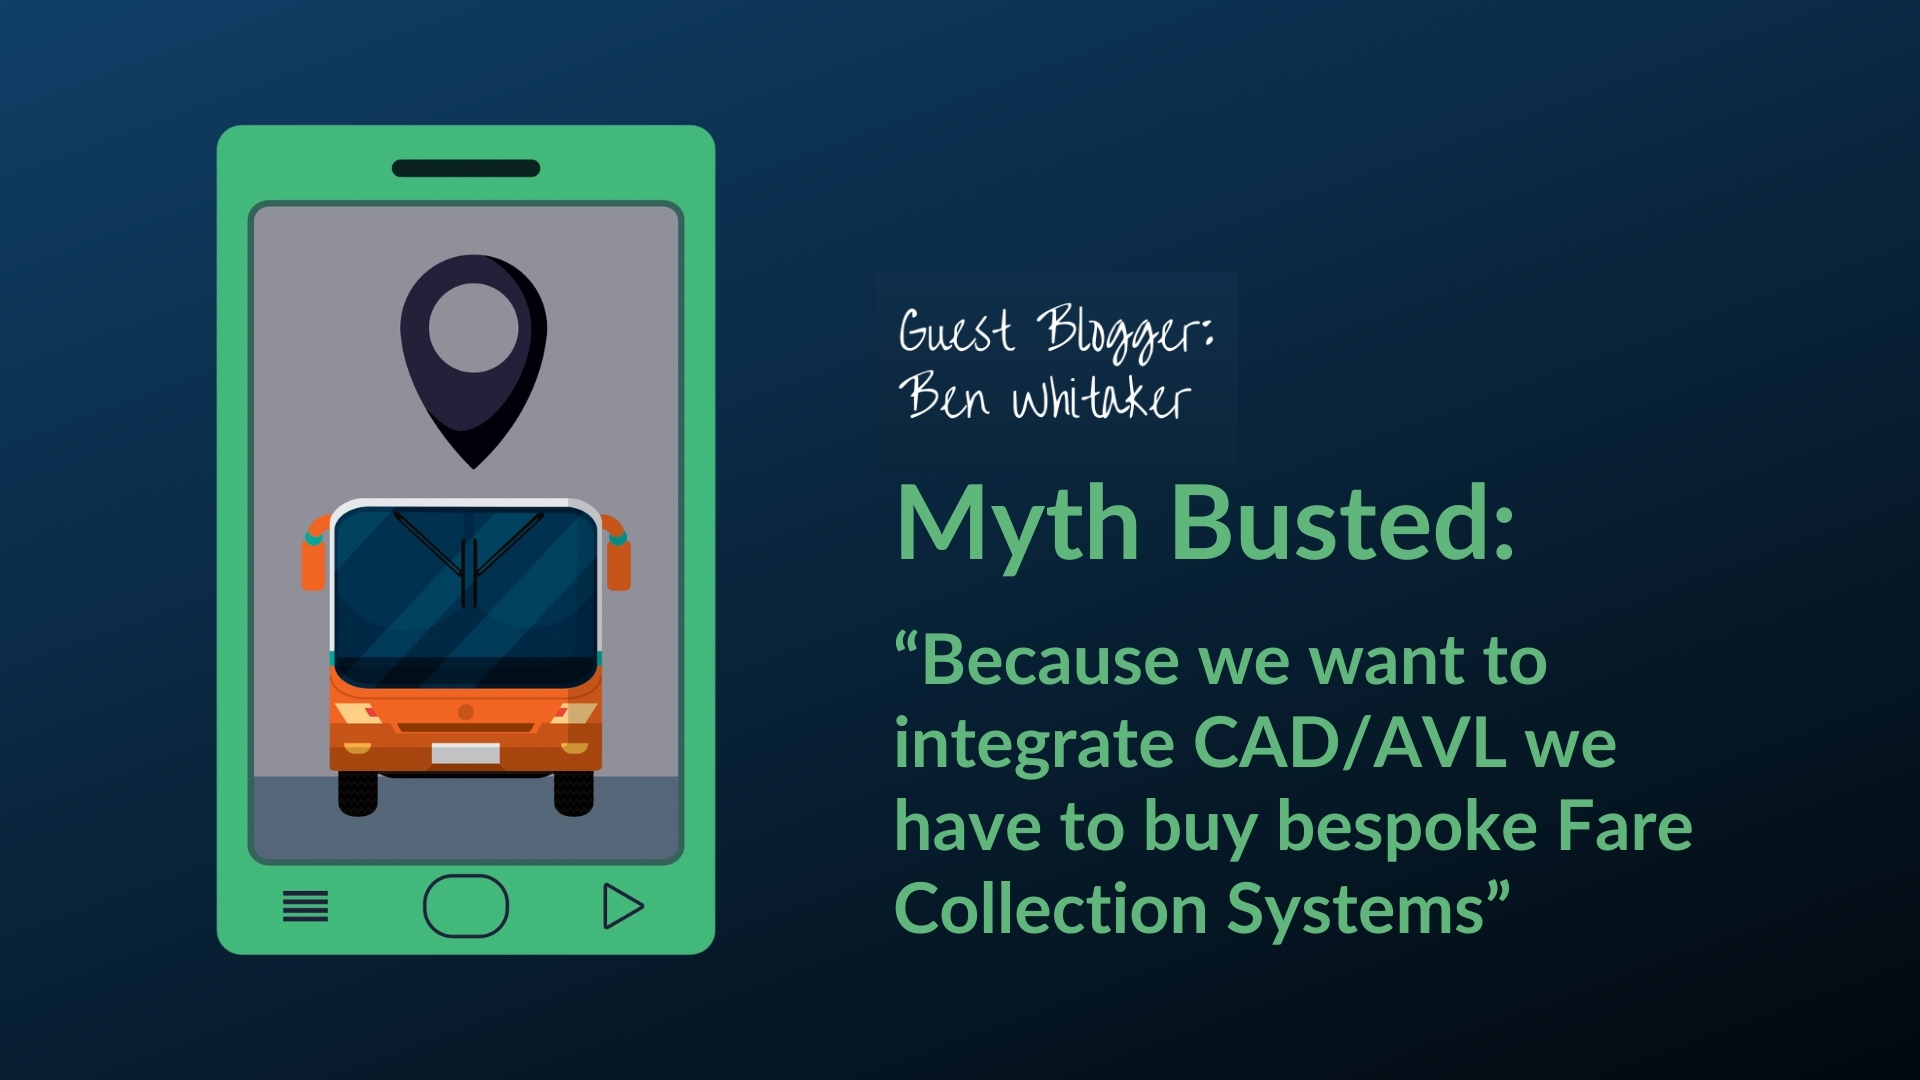 Myth Busted “Because we want to integrate CADAVL we have to buy bespoke Fare Collection Systems” (5)